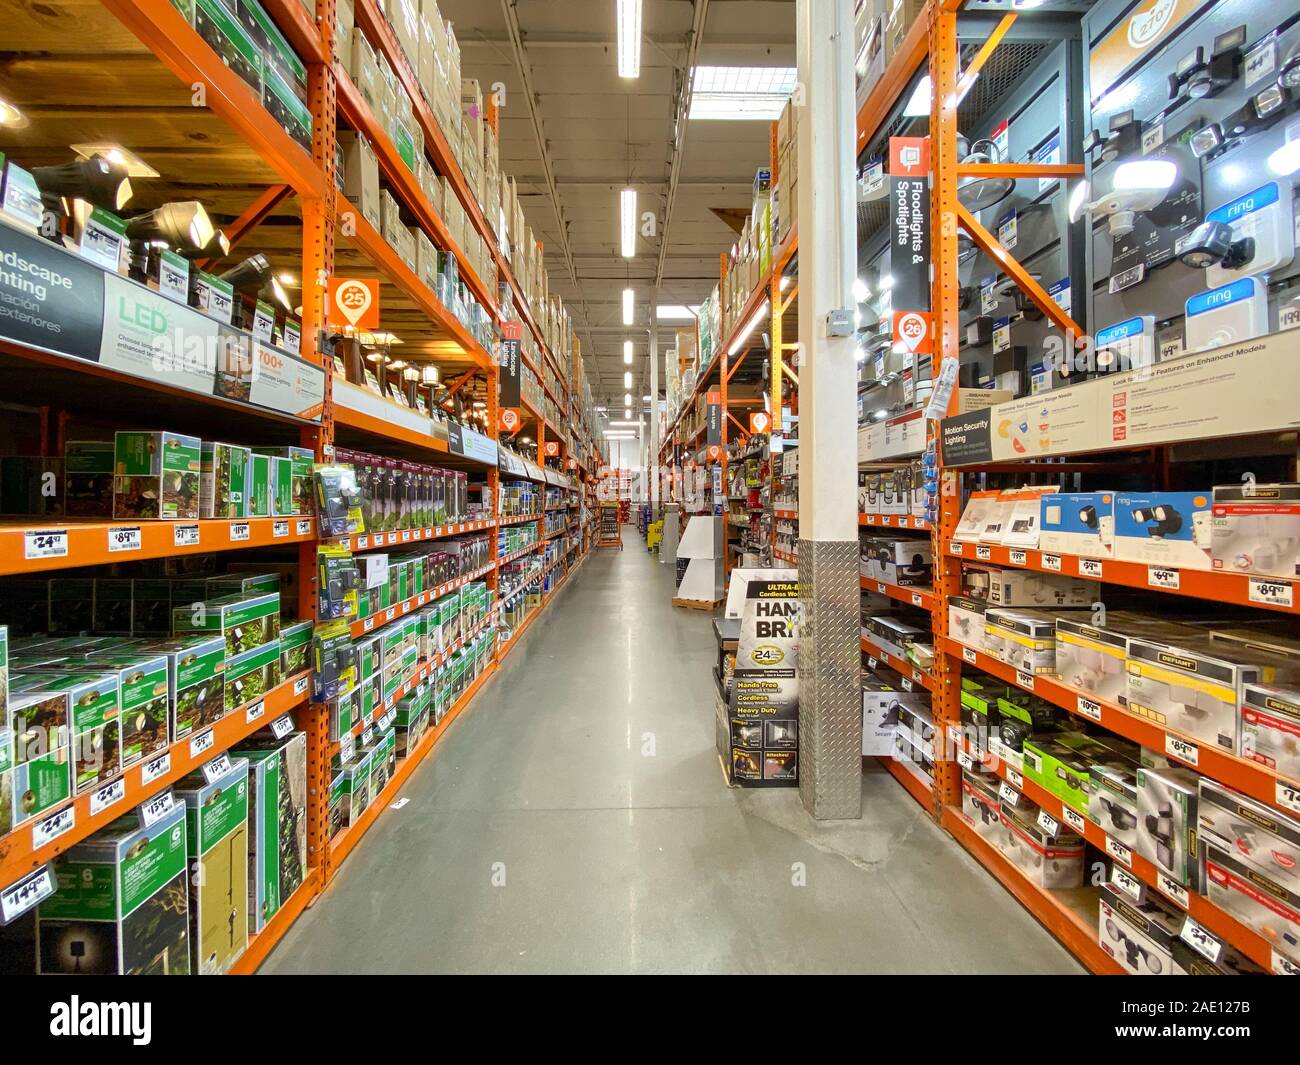 Aisle at The Home Depot hardware store. The Home Depot is the largest american home improvement retailer, San Diego, USA, December 05th, 2019 Stock Photo